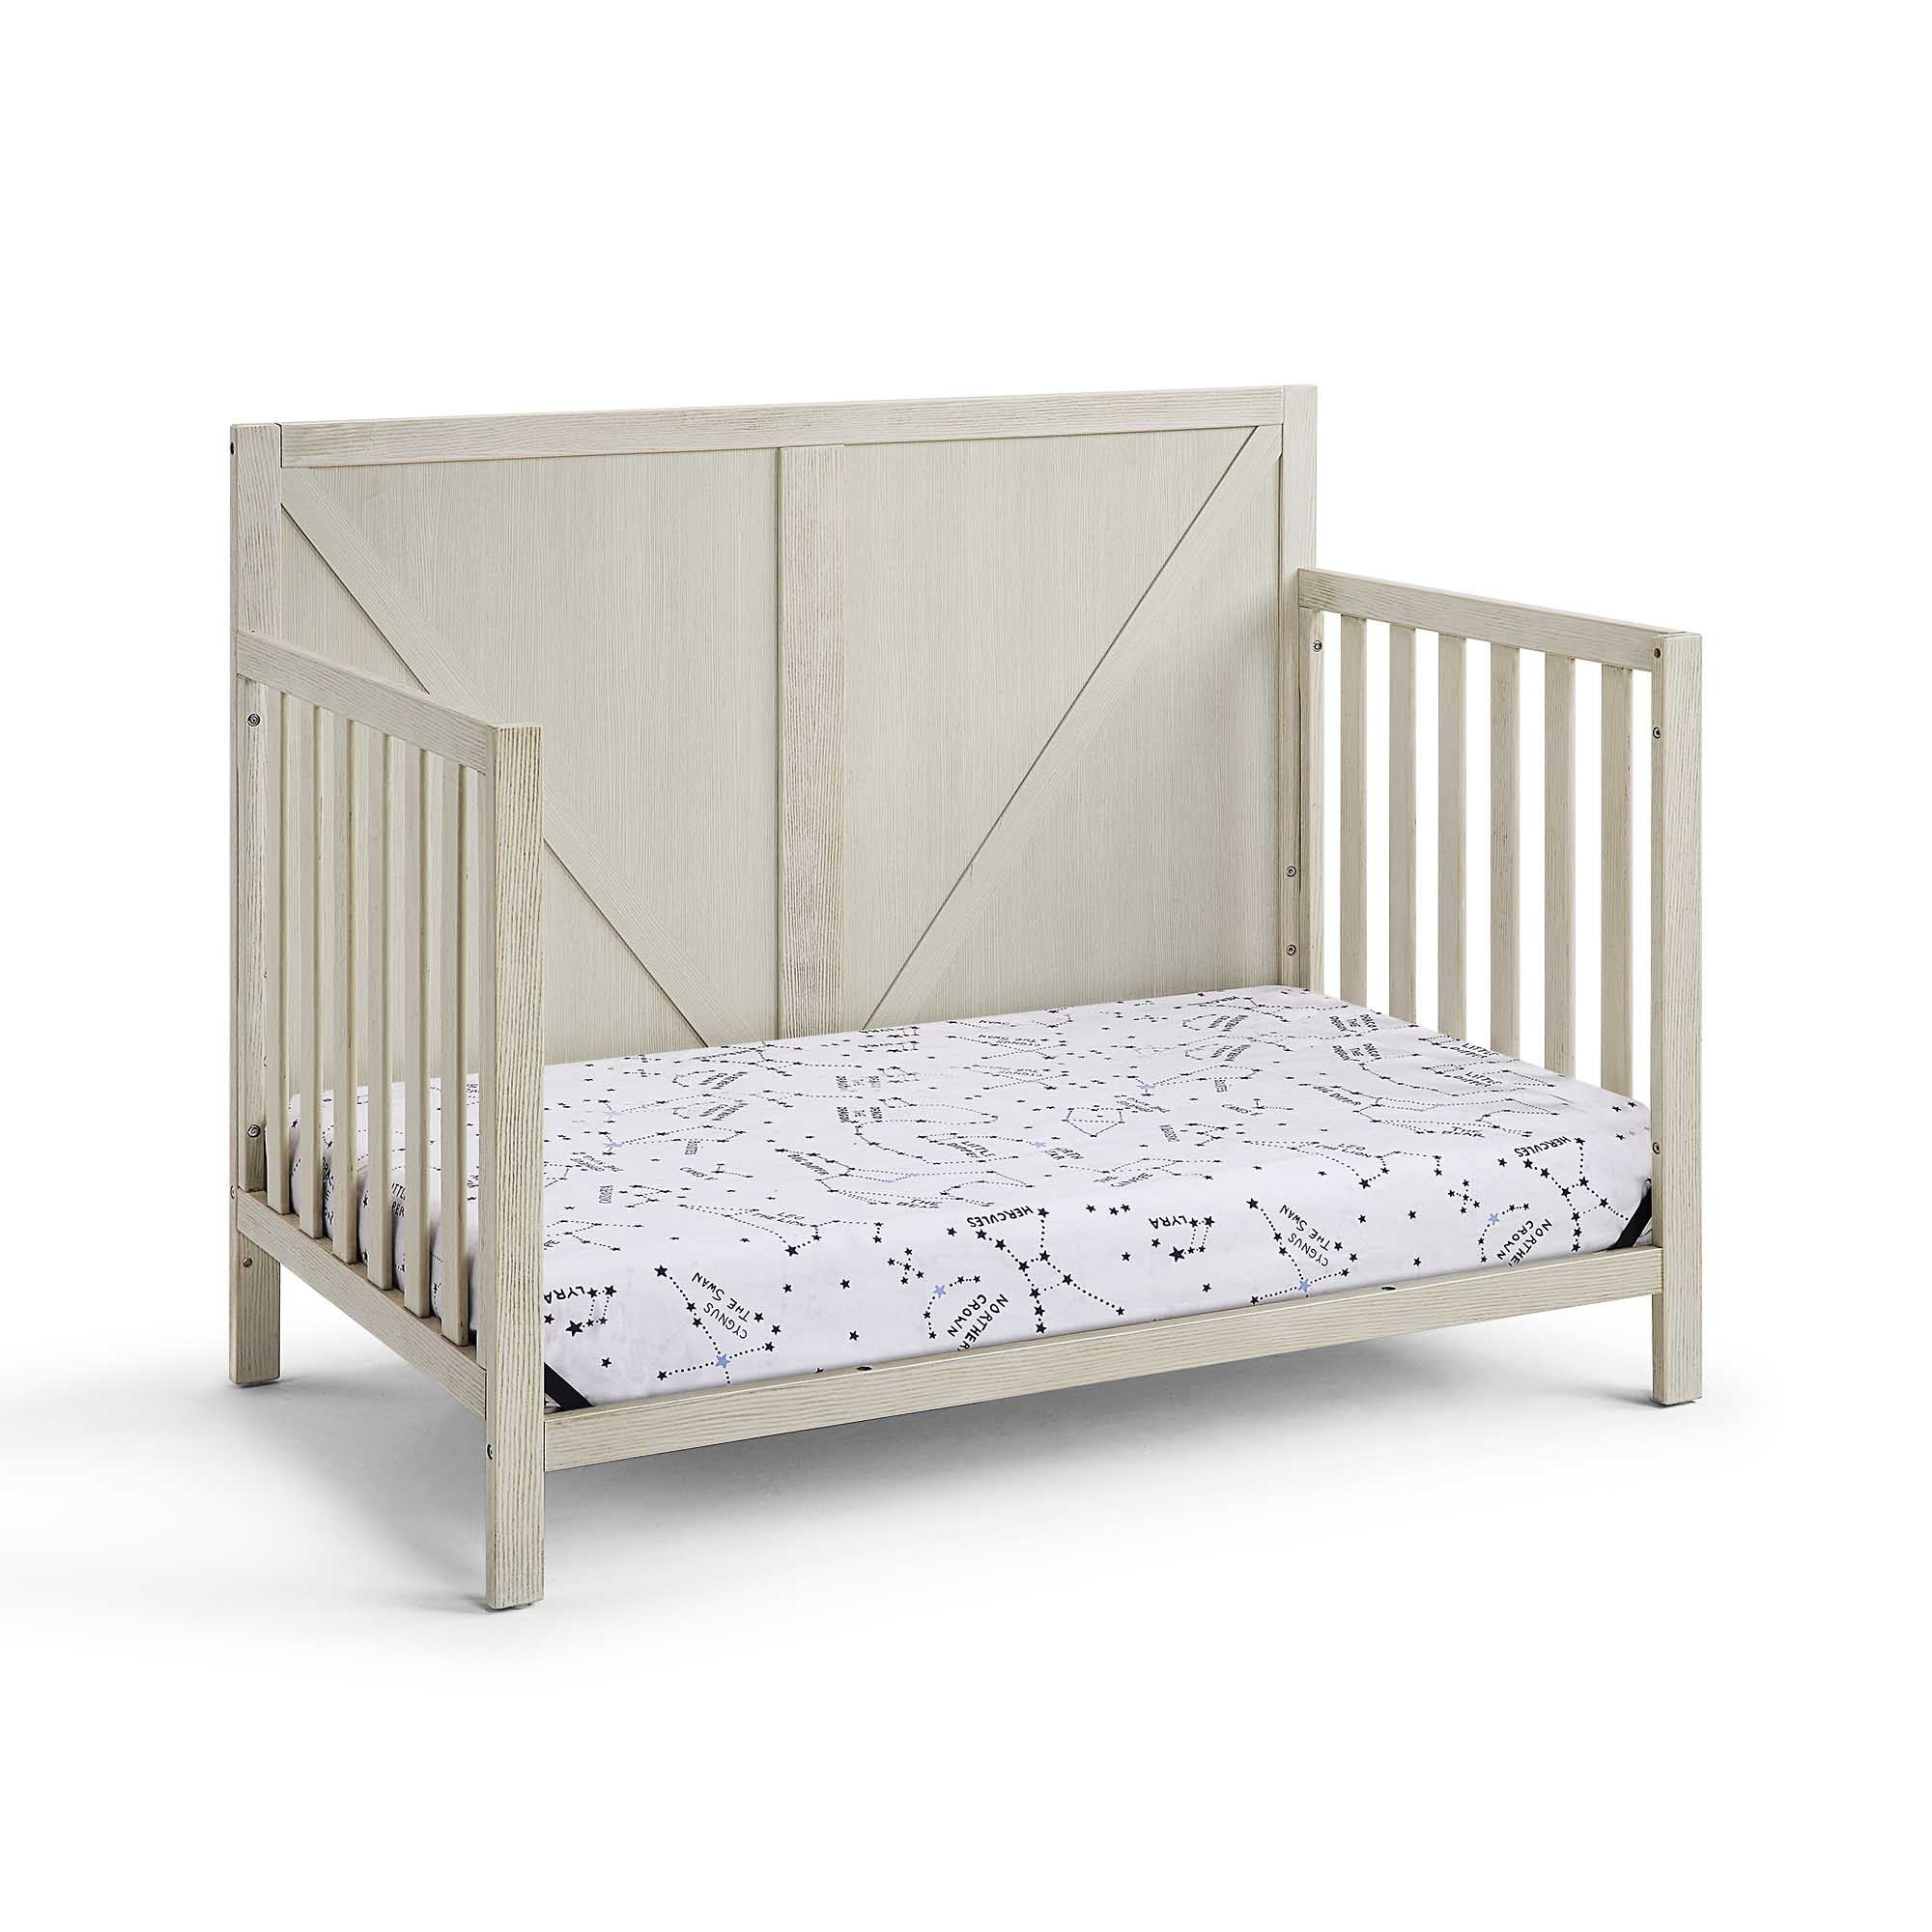 Barnside 4 in 1 Convertible Crib Washed Gray grey-solid wood